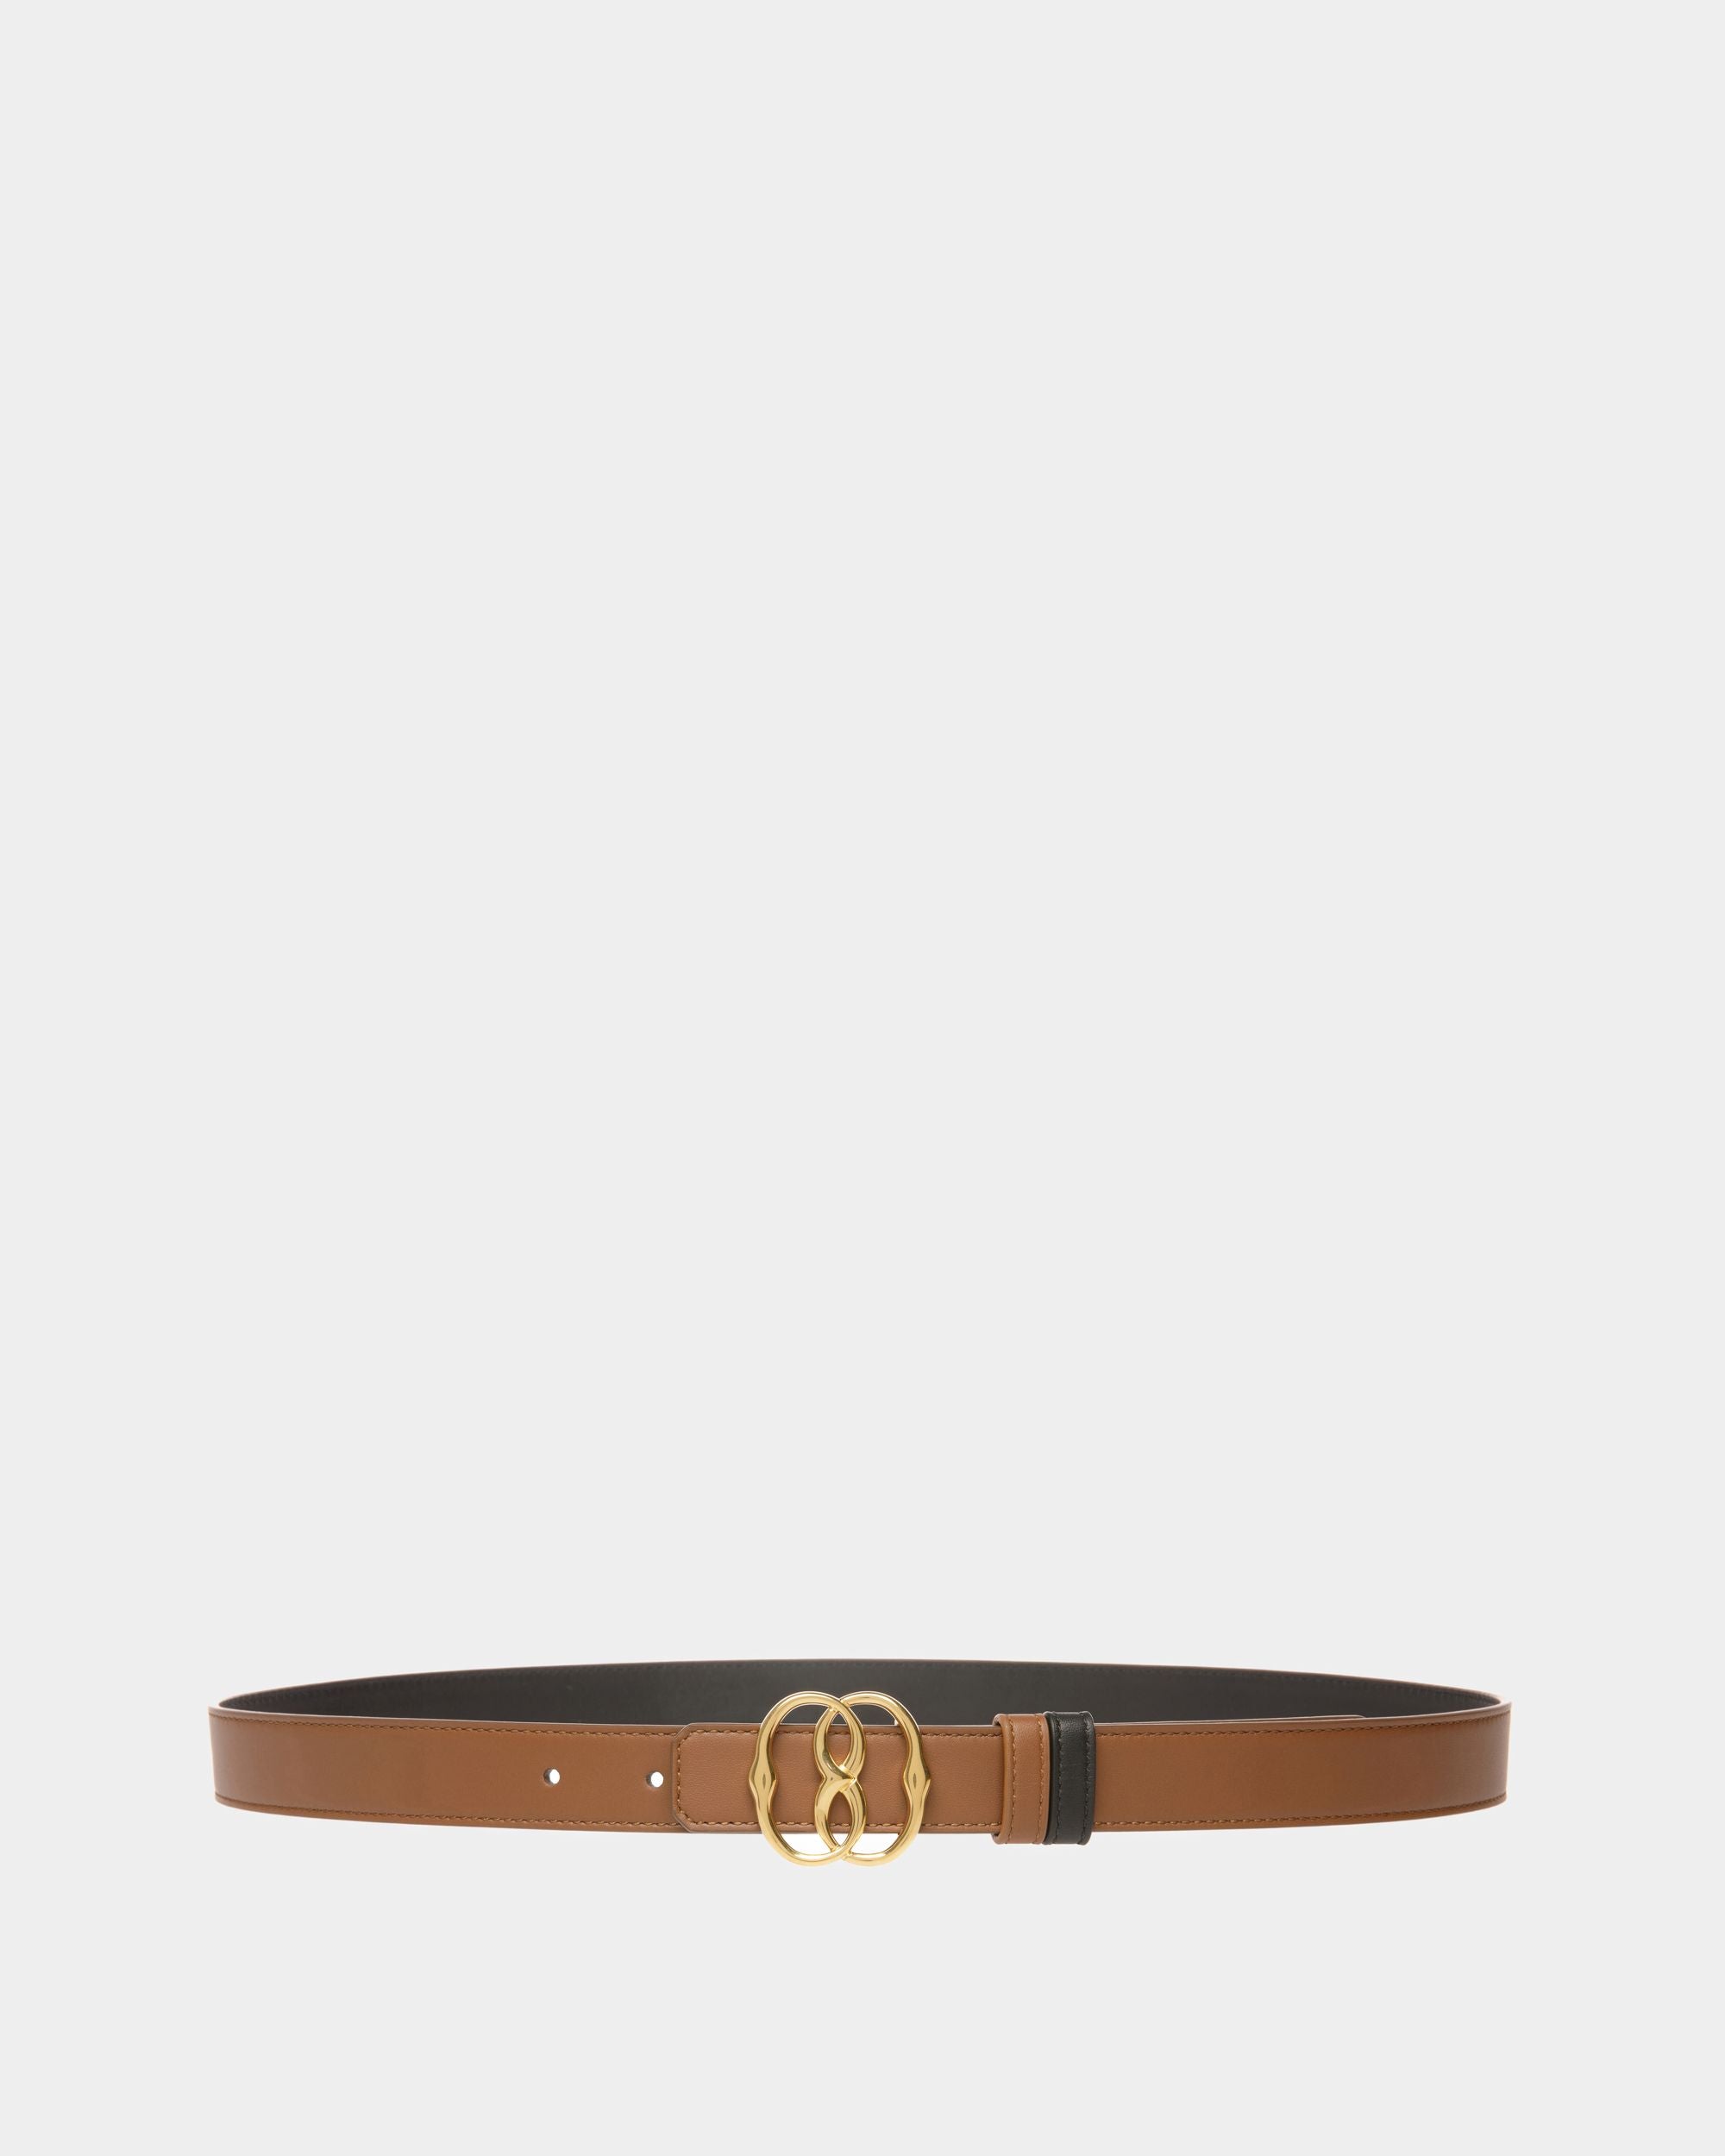 Emblem | Women's Fixed And Reversible Belt | Brown Leather | Bally | Still Life Front